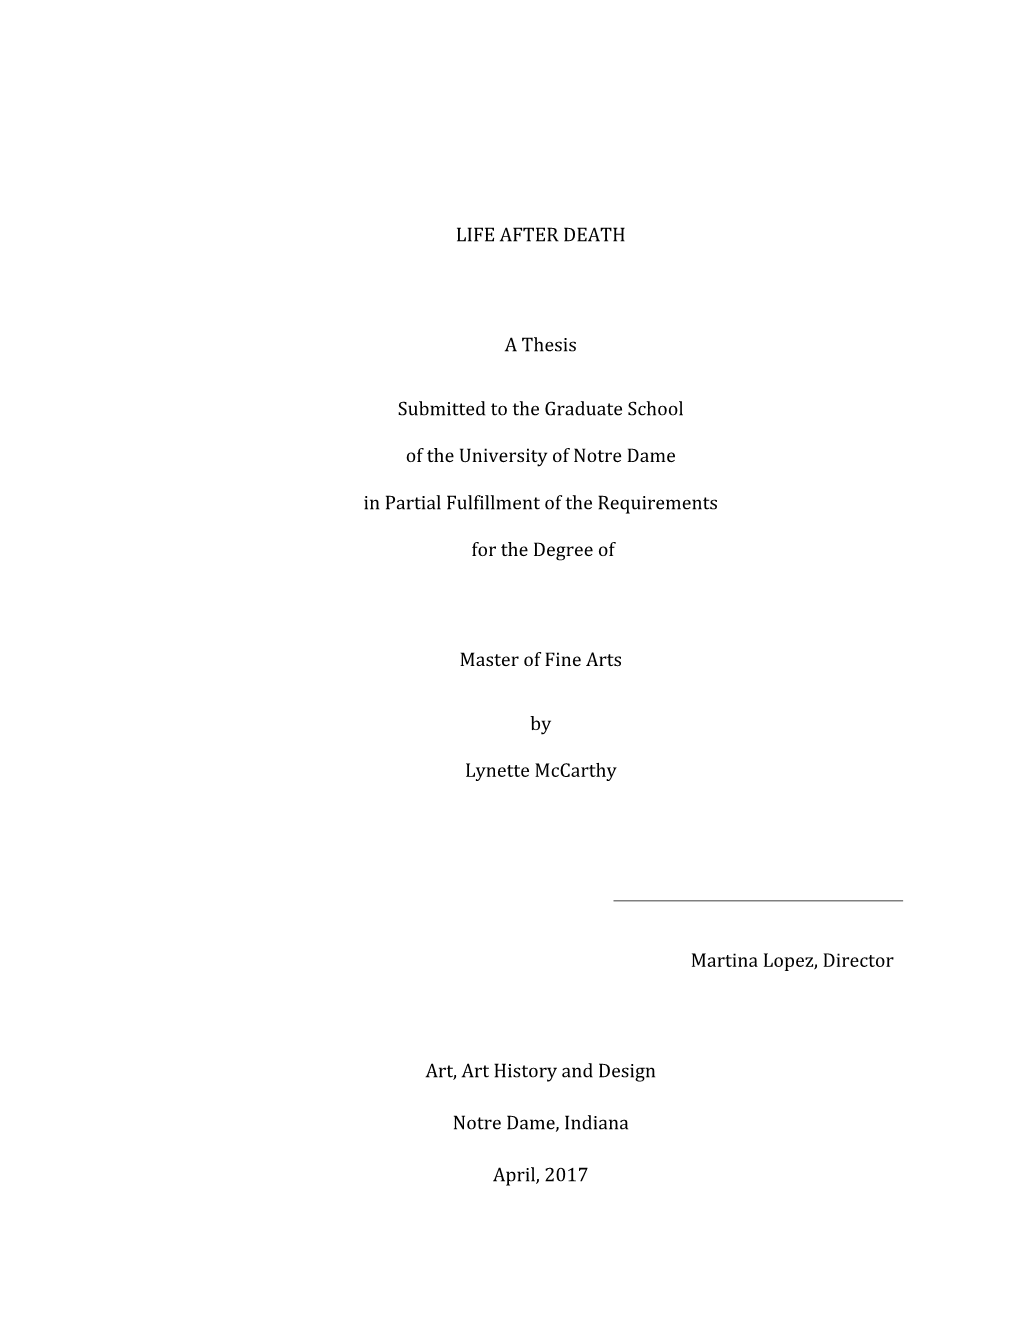 LIFE AFTER DEATH a Thesis Submitted to the Graduate School